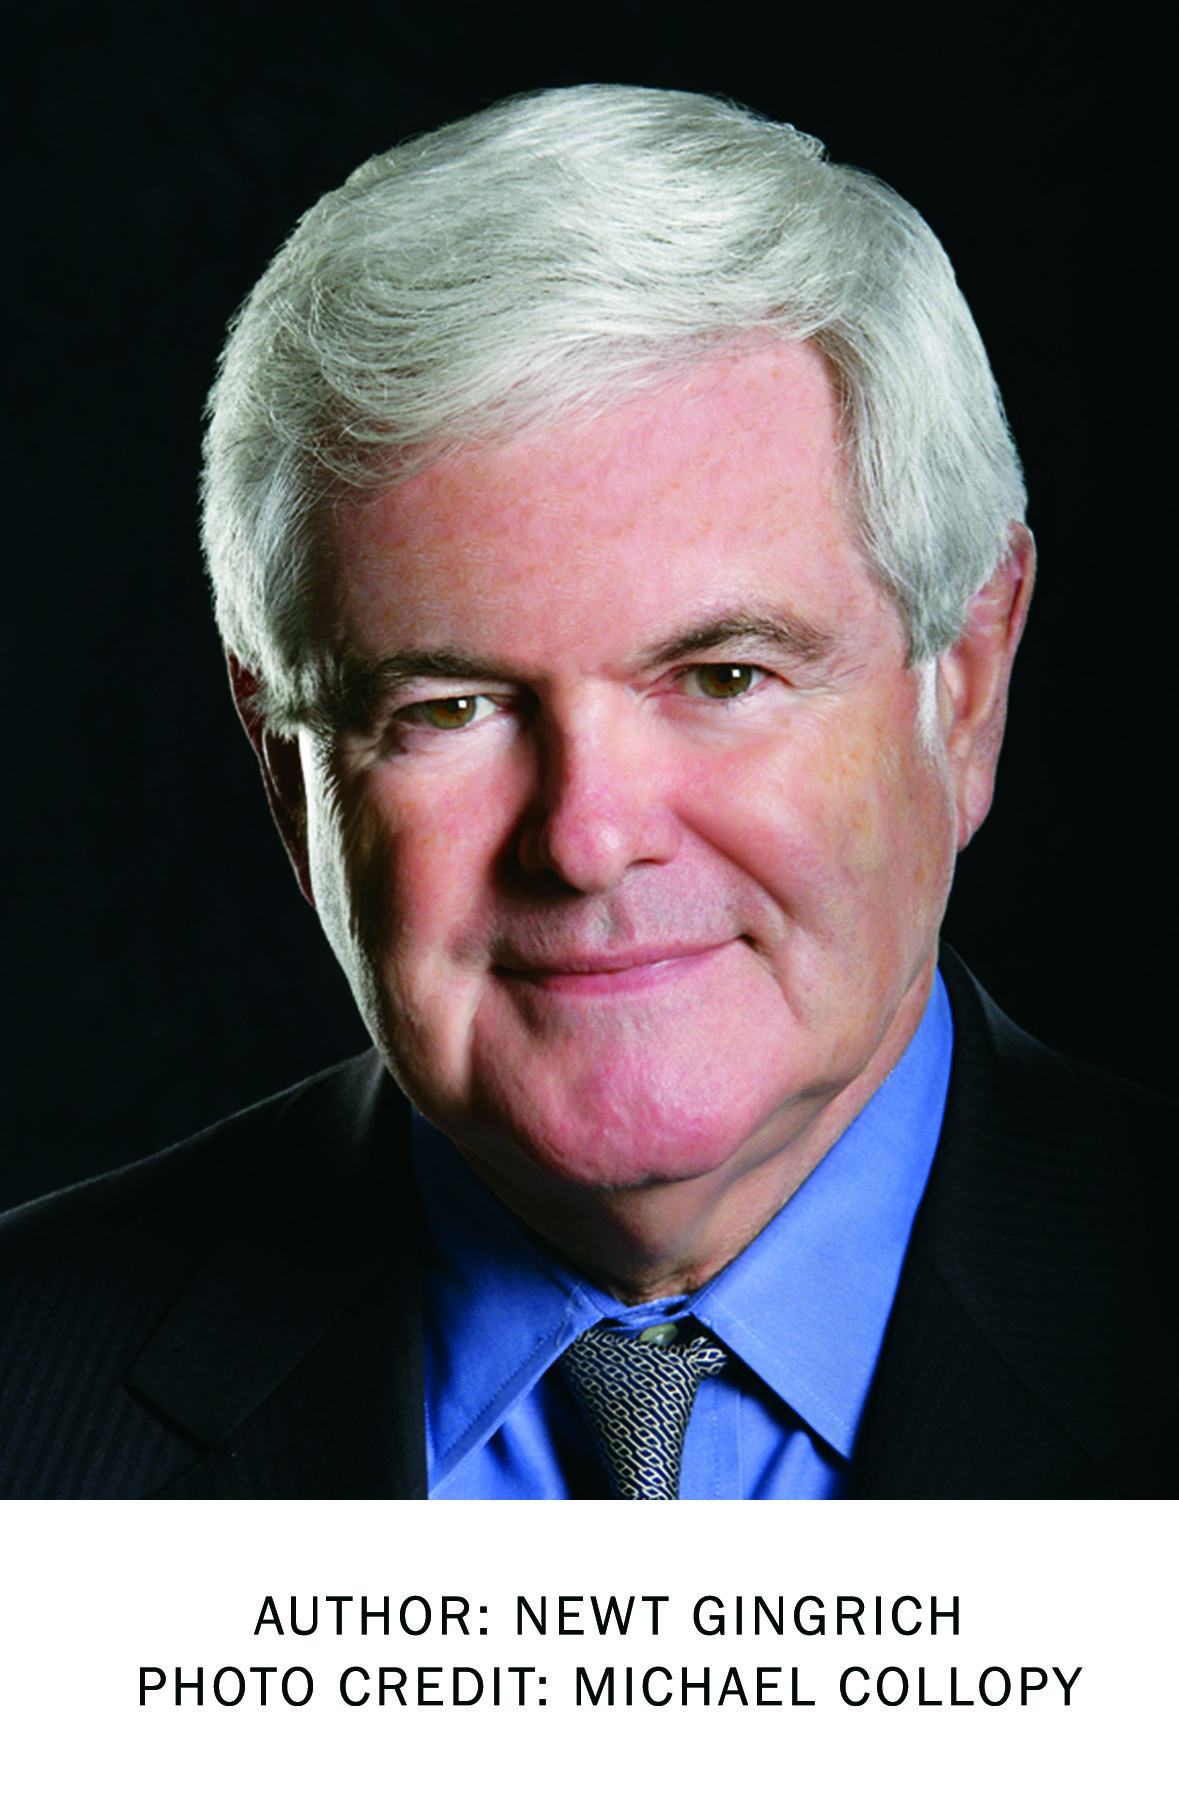 Books by Order by newt gingrich